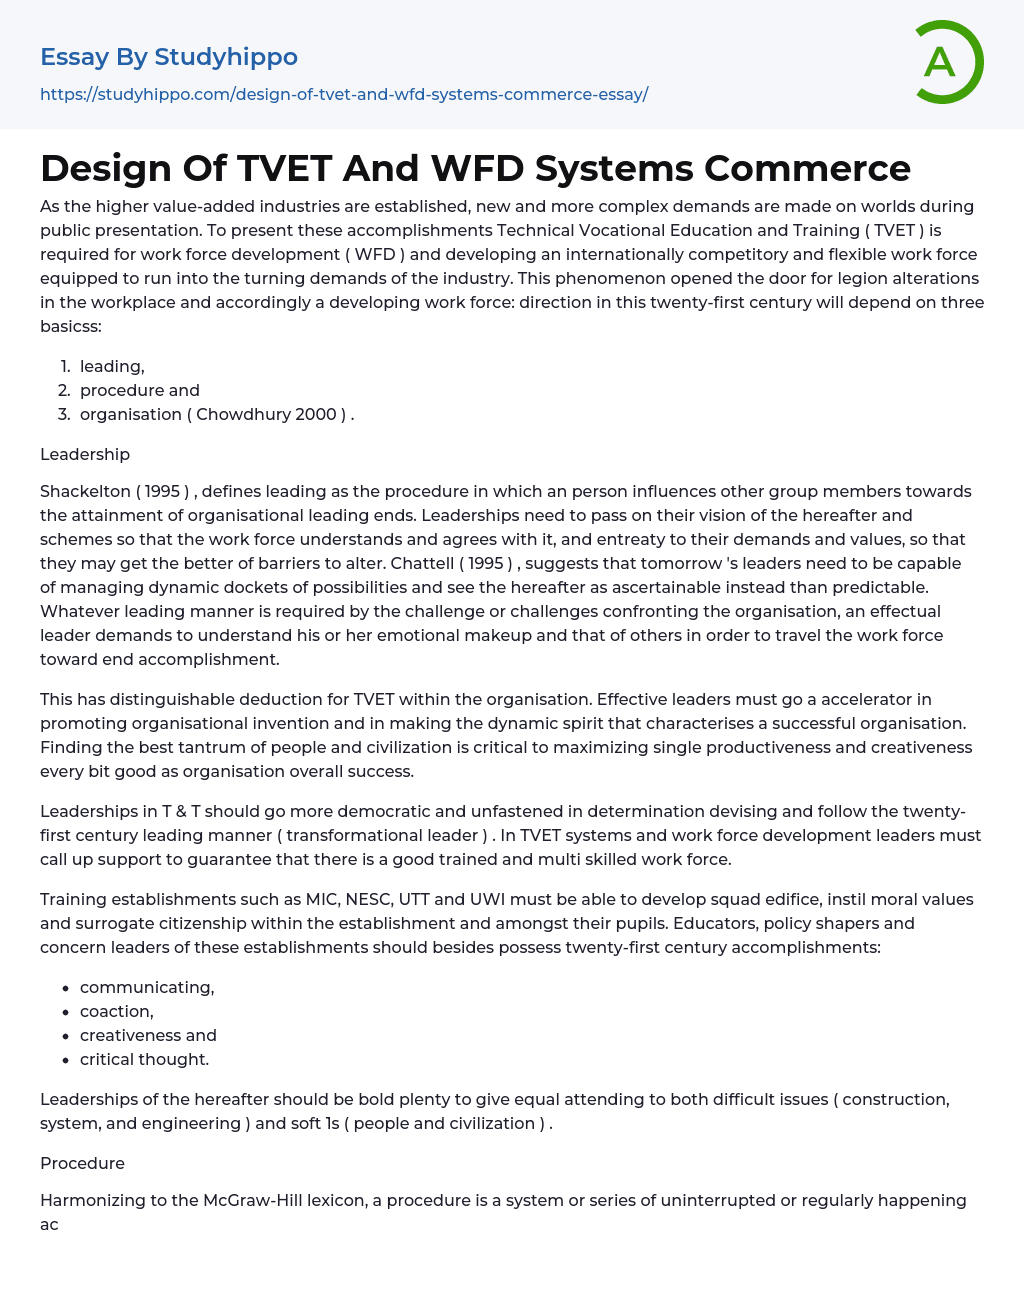 Design Of TVET And WFD Systems Commerce Essay Example